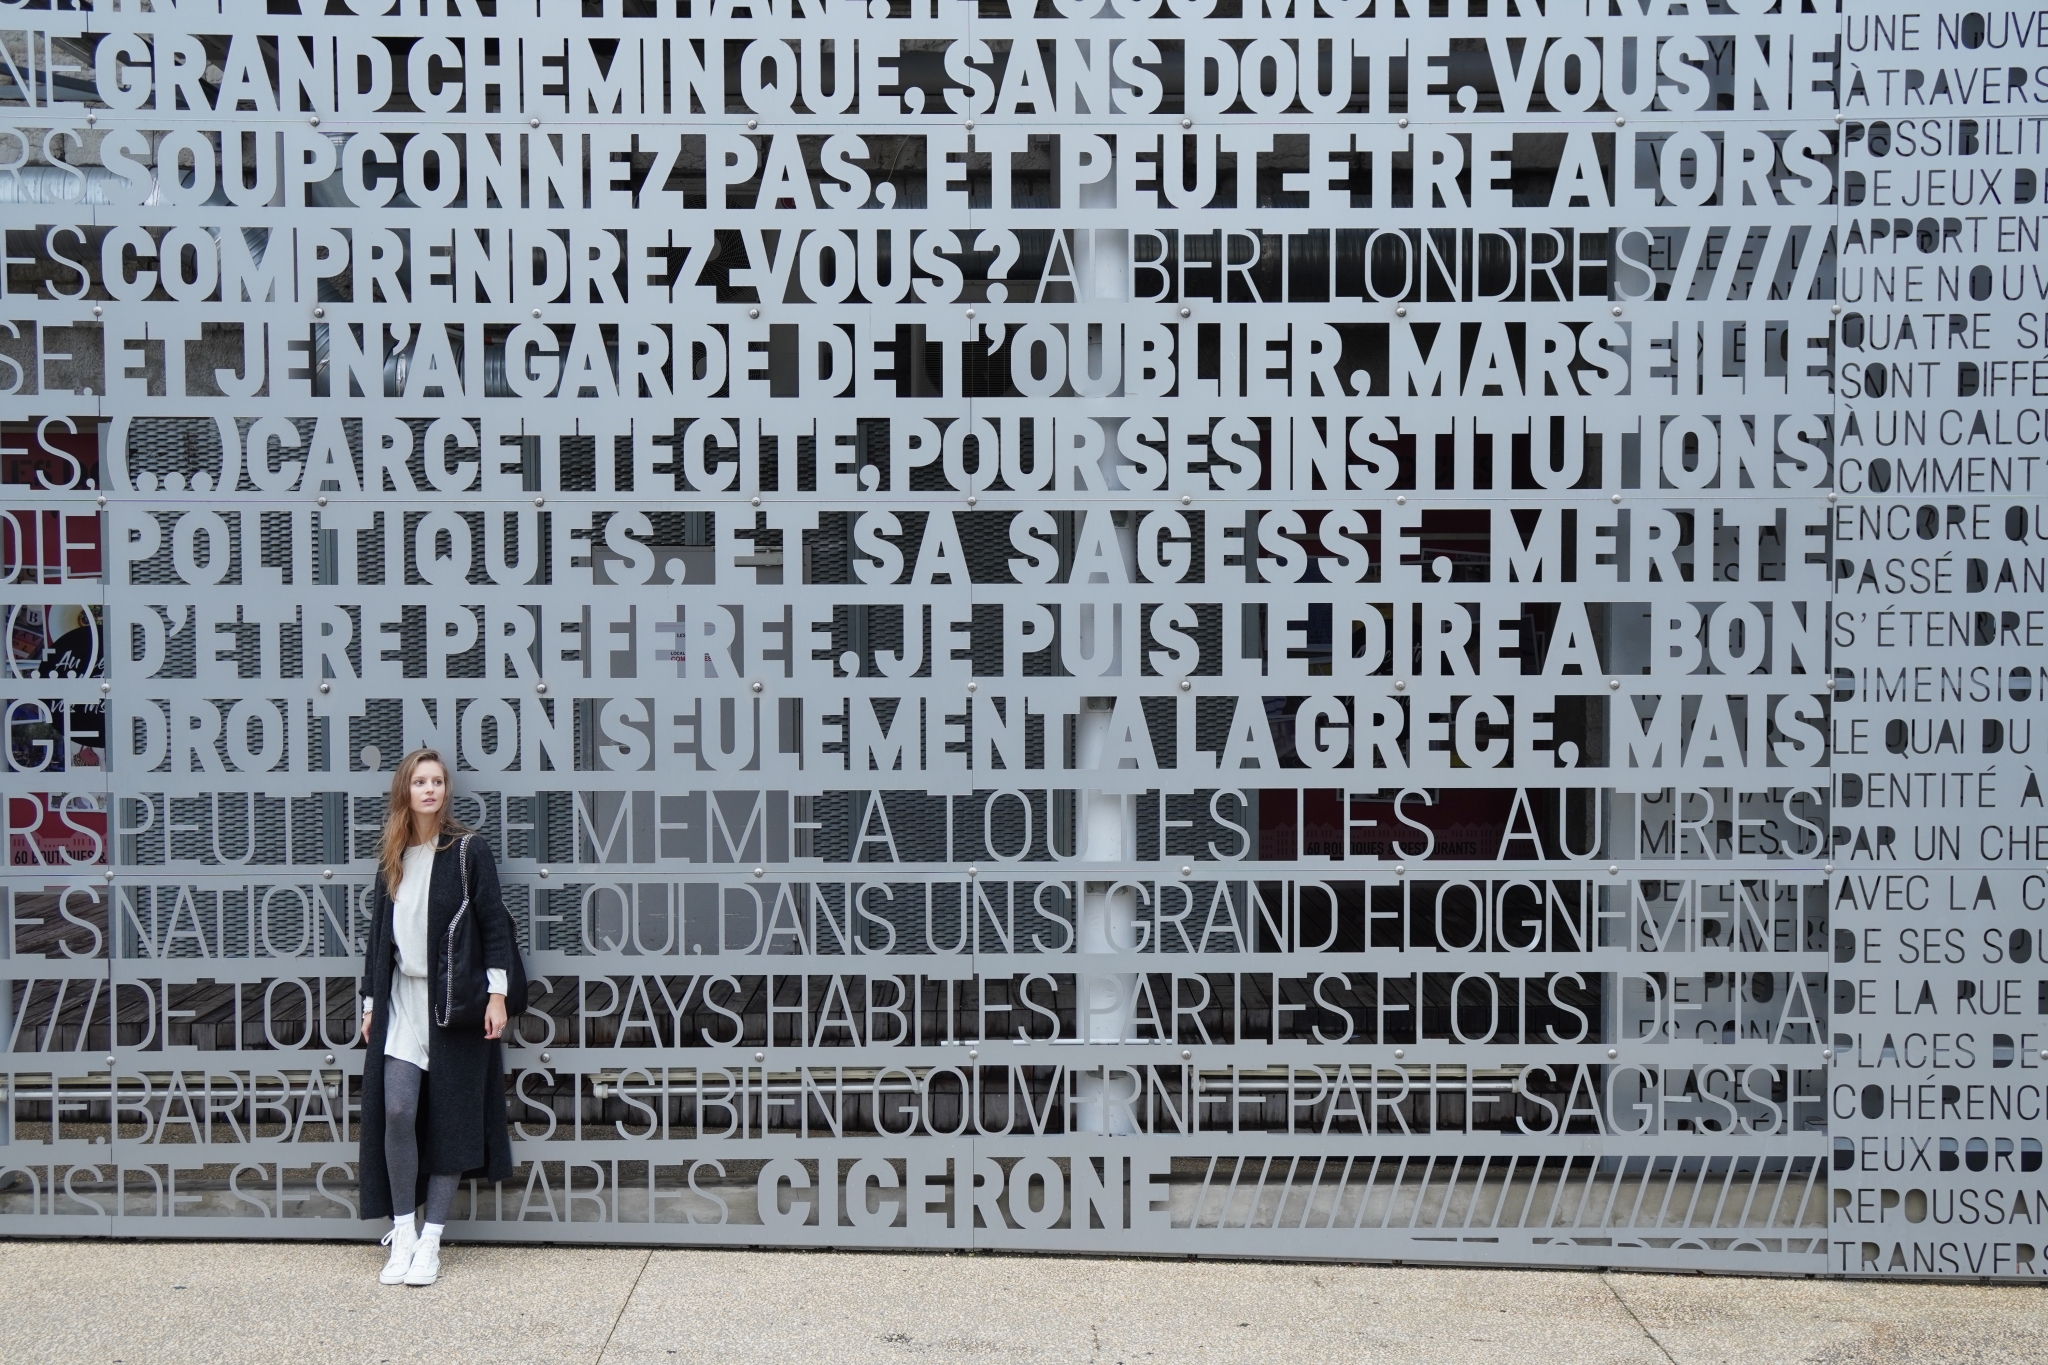 Wide shot of woman standing by a wall inscribed with French text